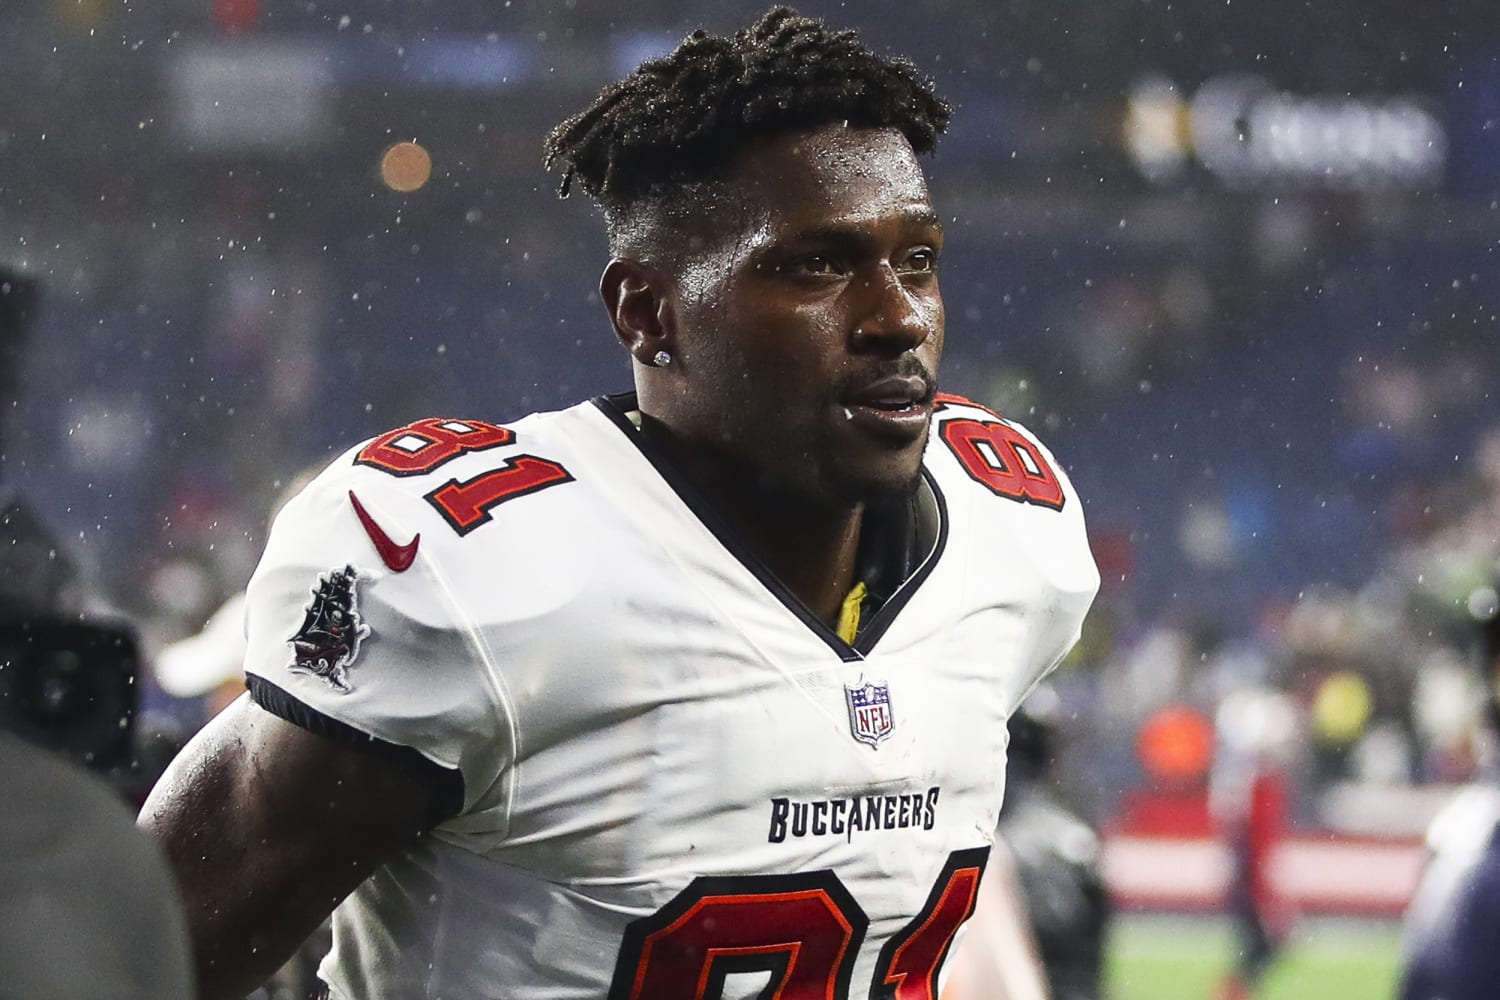 What should the Tampa Bay Buccaneers do with Antonio Brown?